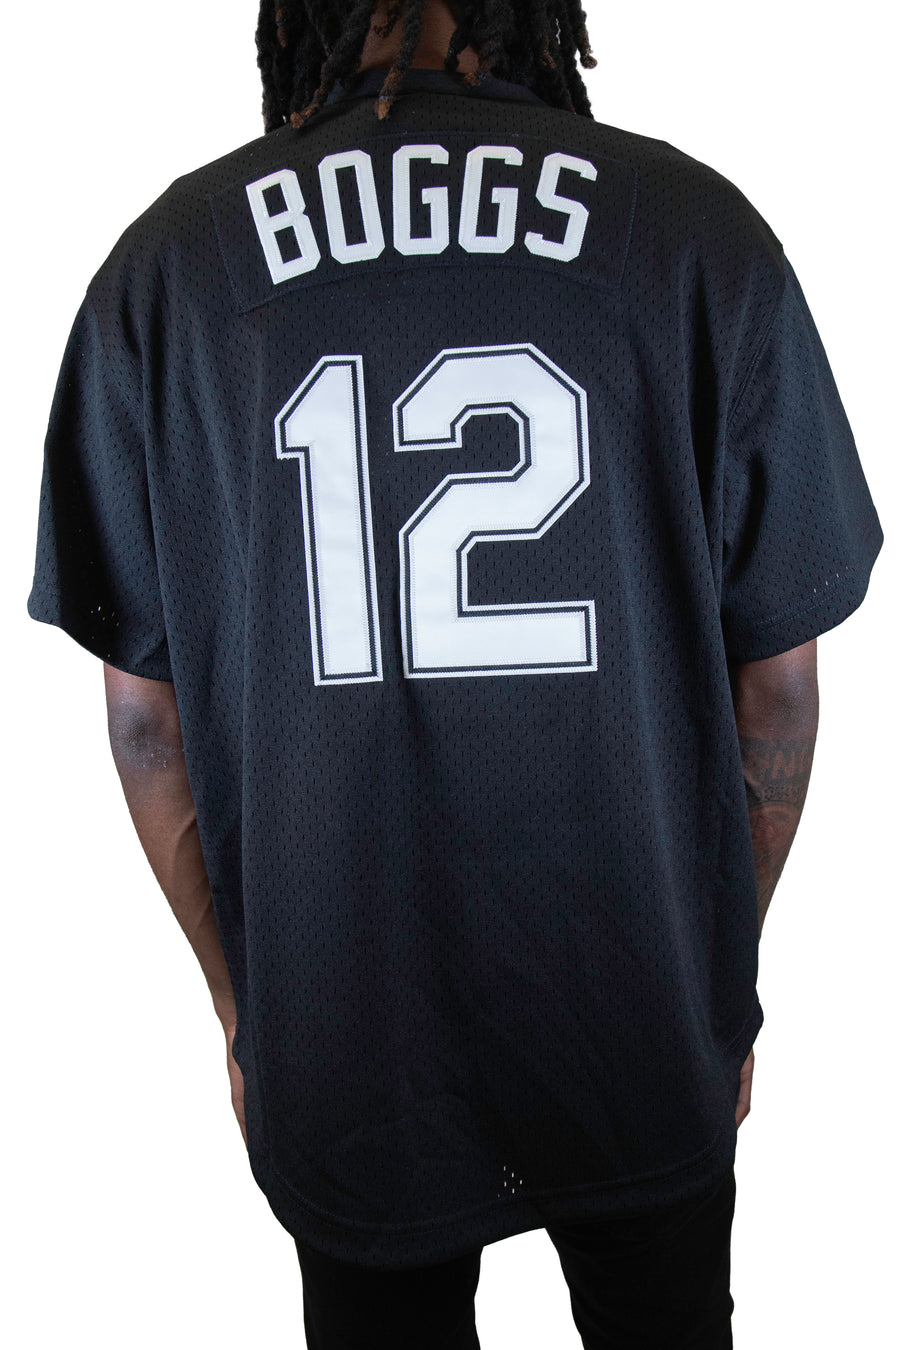 Mitchell & Ness: Cooperstown Jersey Tampa Bay Devil Rays (Wade Boggs)